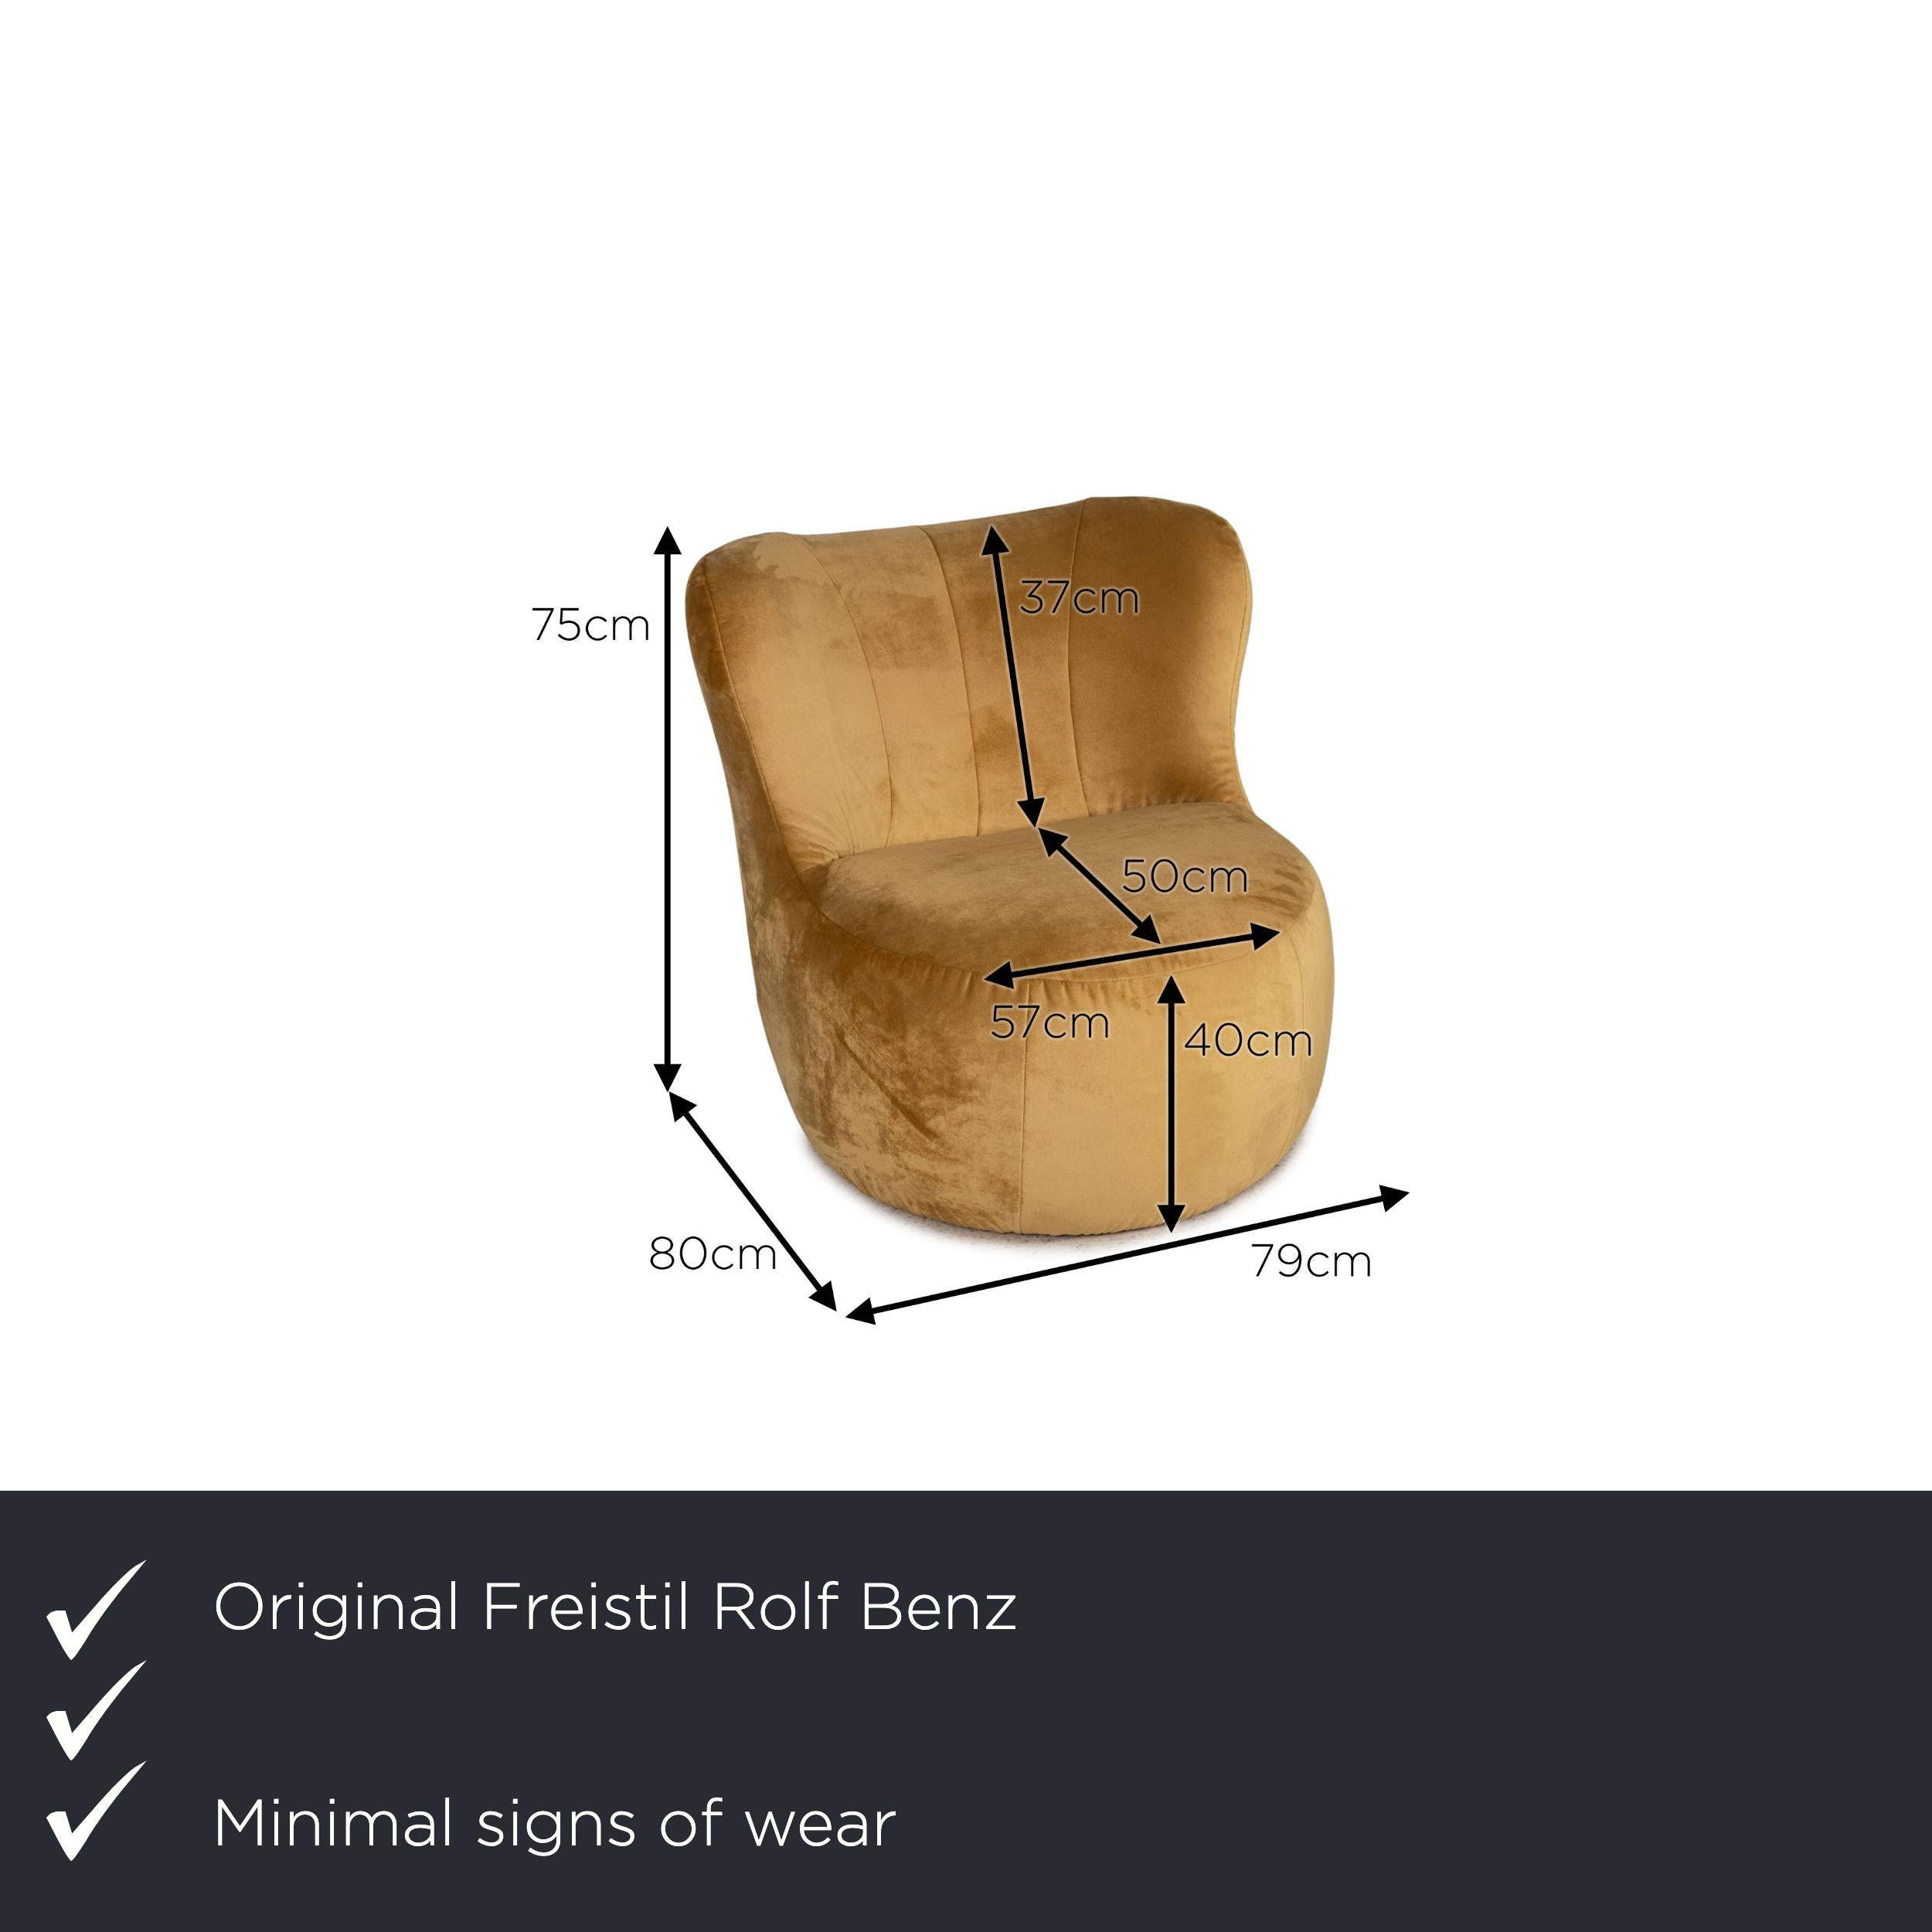 We present to you a Freistil Rolf Benz 173 fabric armchair yellow.
 

Product measurements in centimeters:

depth: 80
width: 79
height: 75
seat height: 40
rest height: 
seat depth: 50
seat width: 57
back height: 37.
 